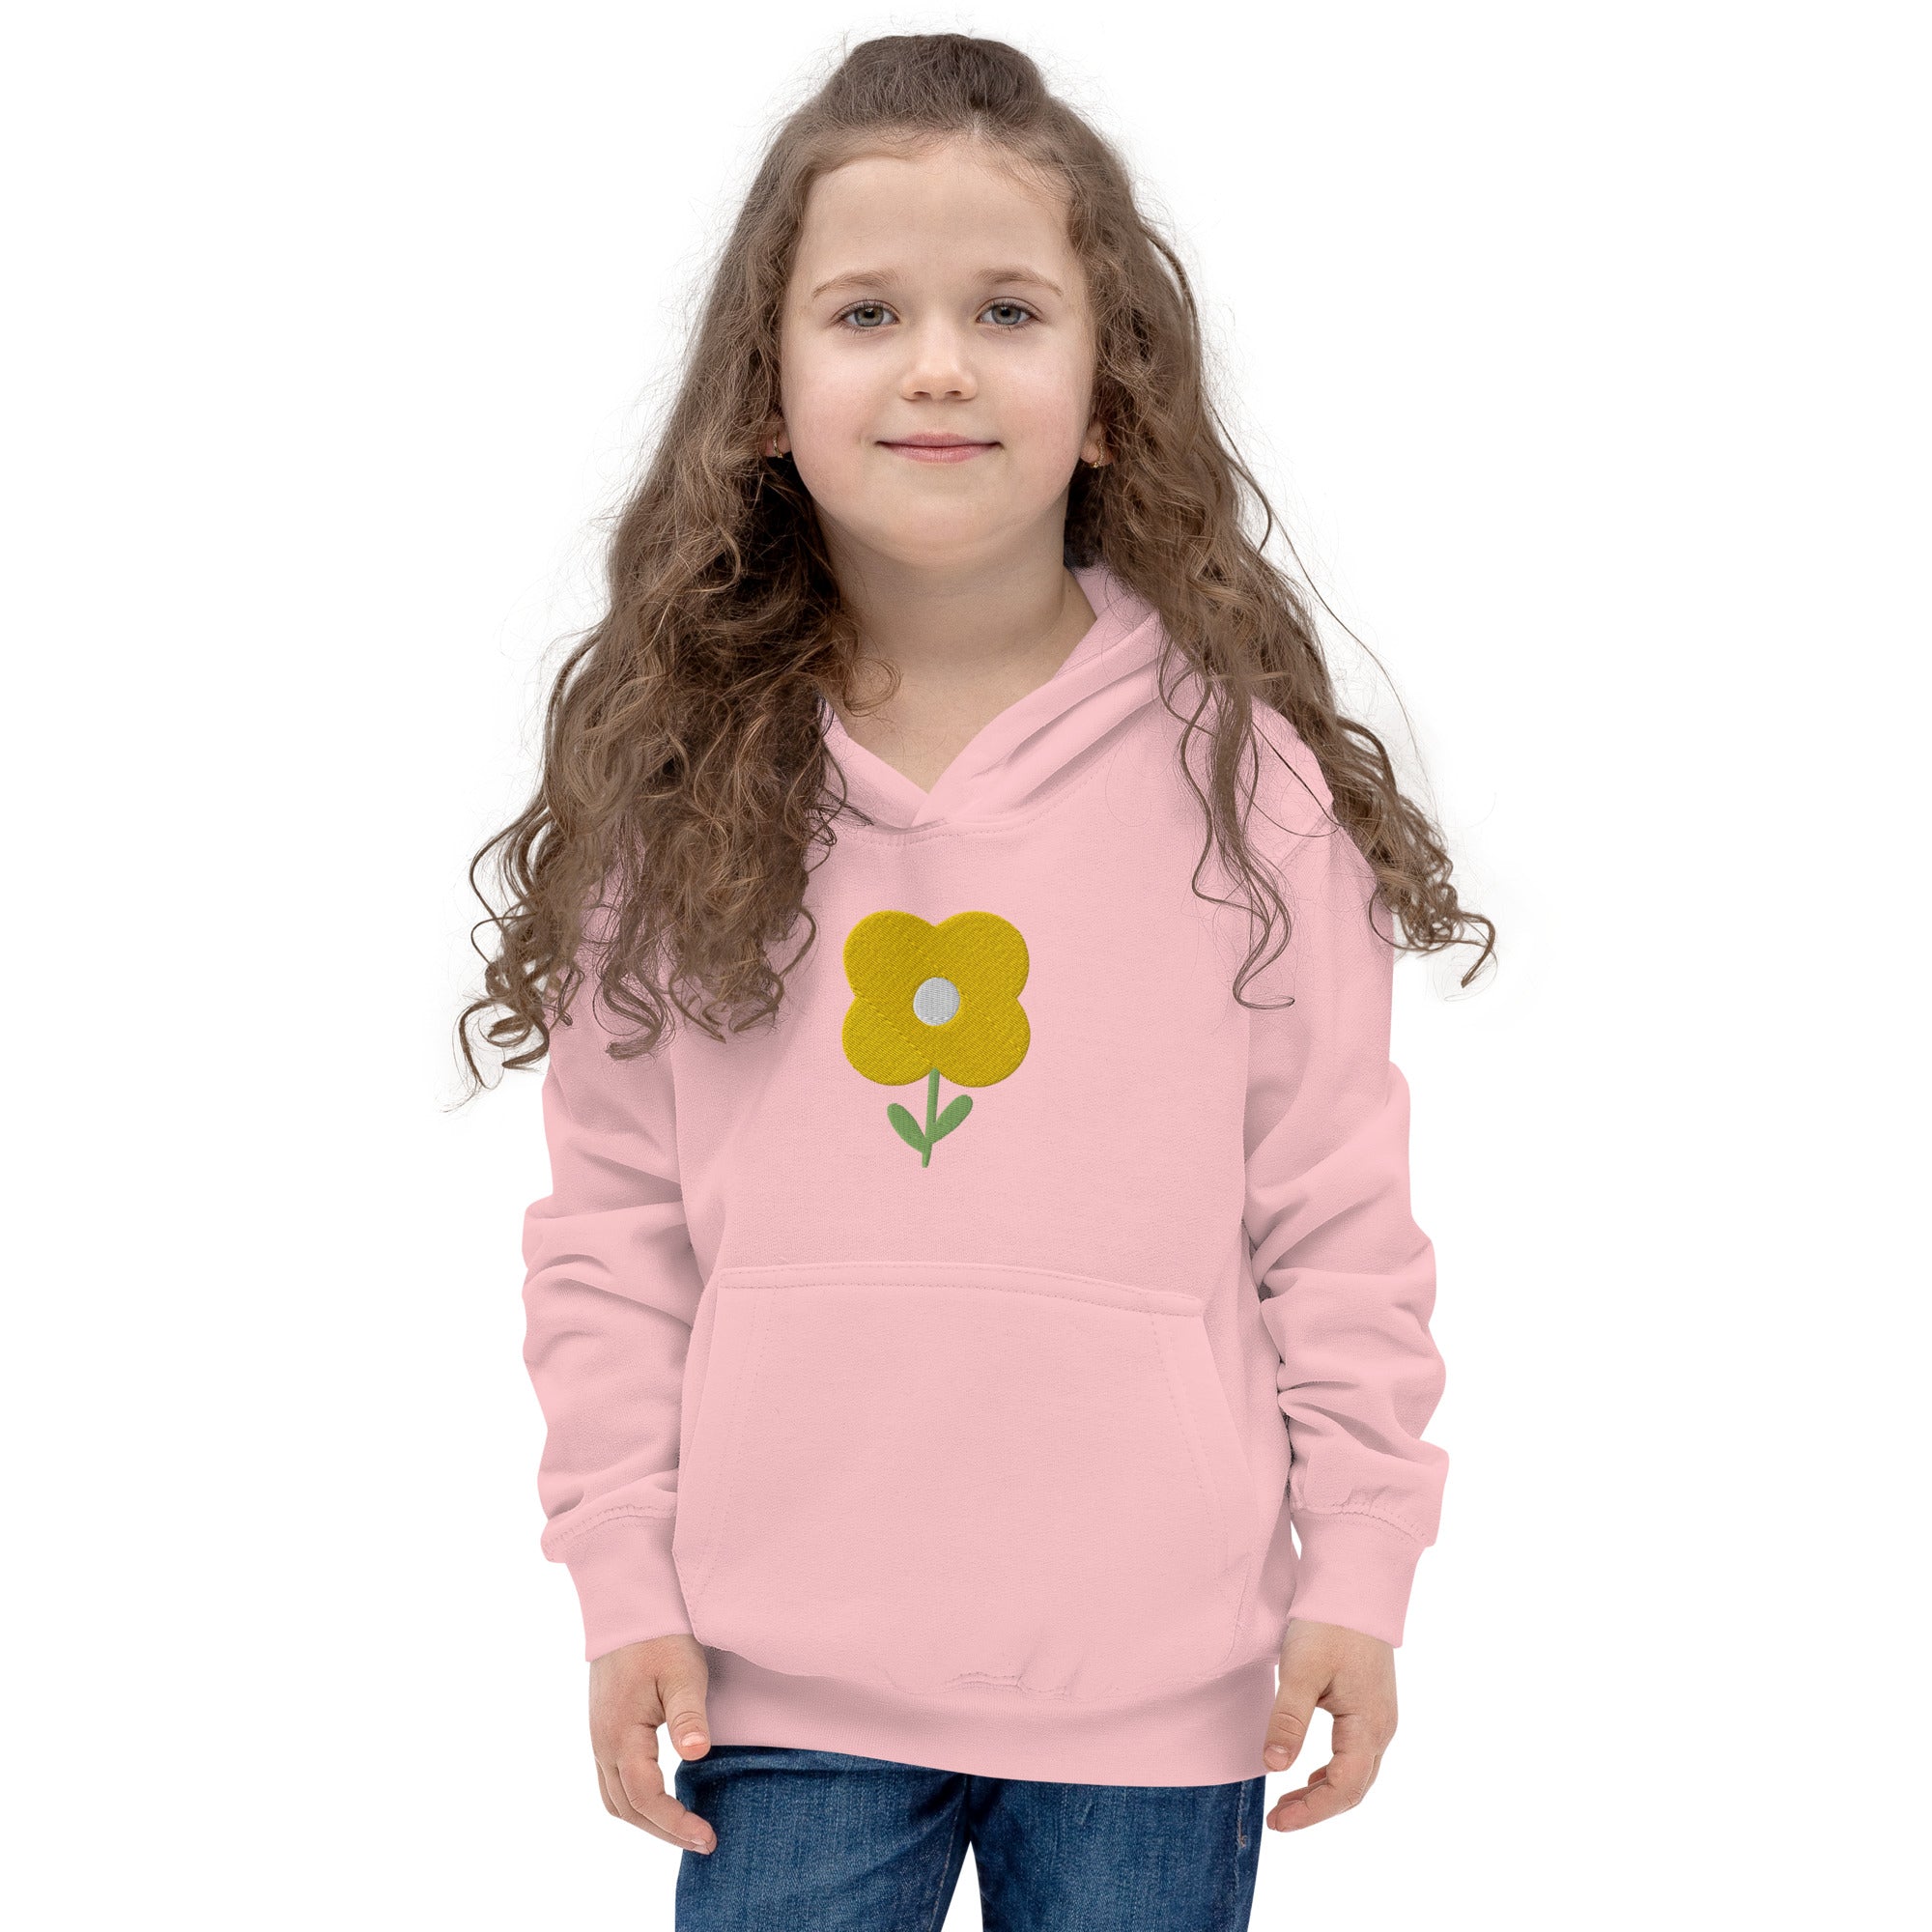 Kids Buttercup Embroidered Hoodie